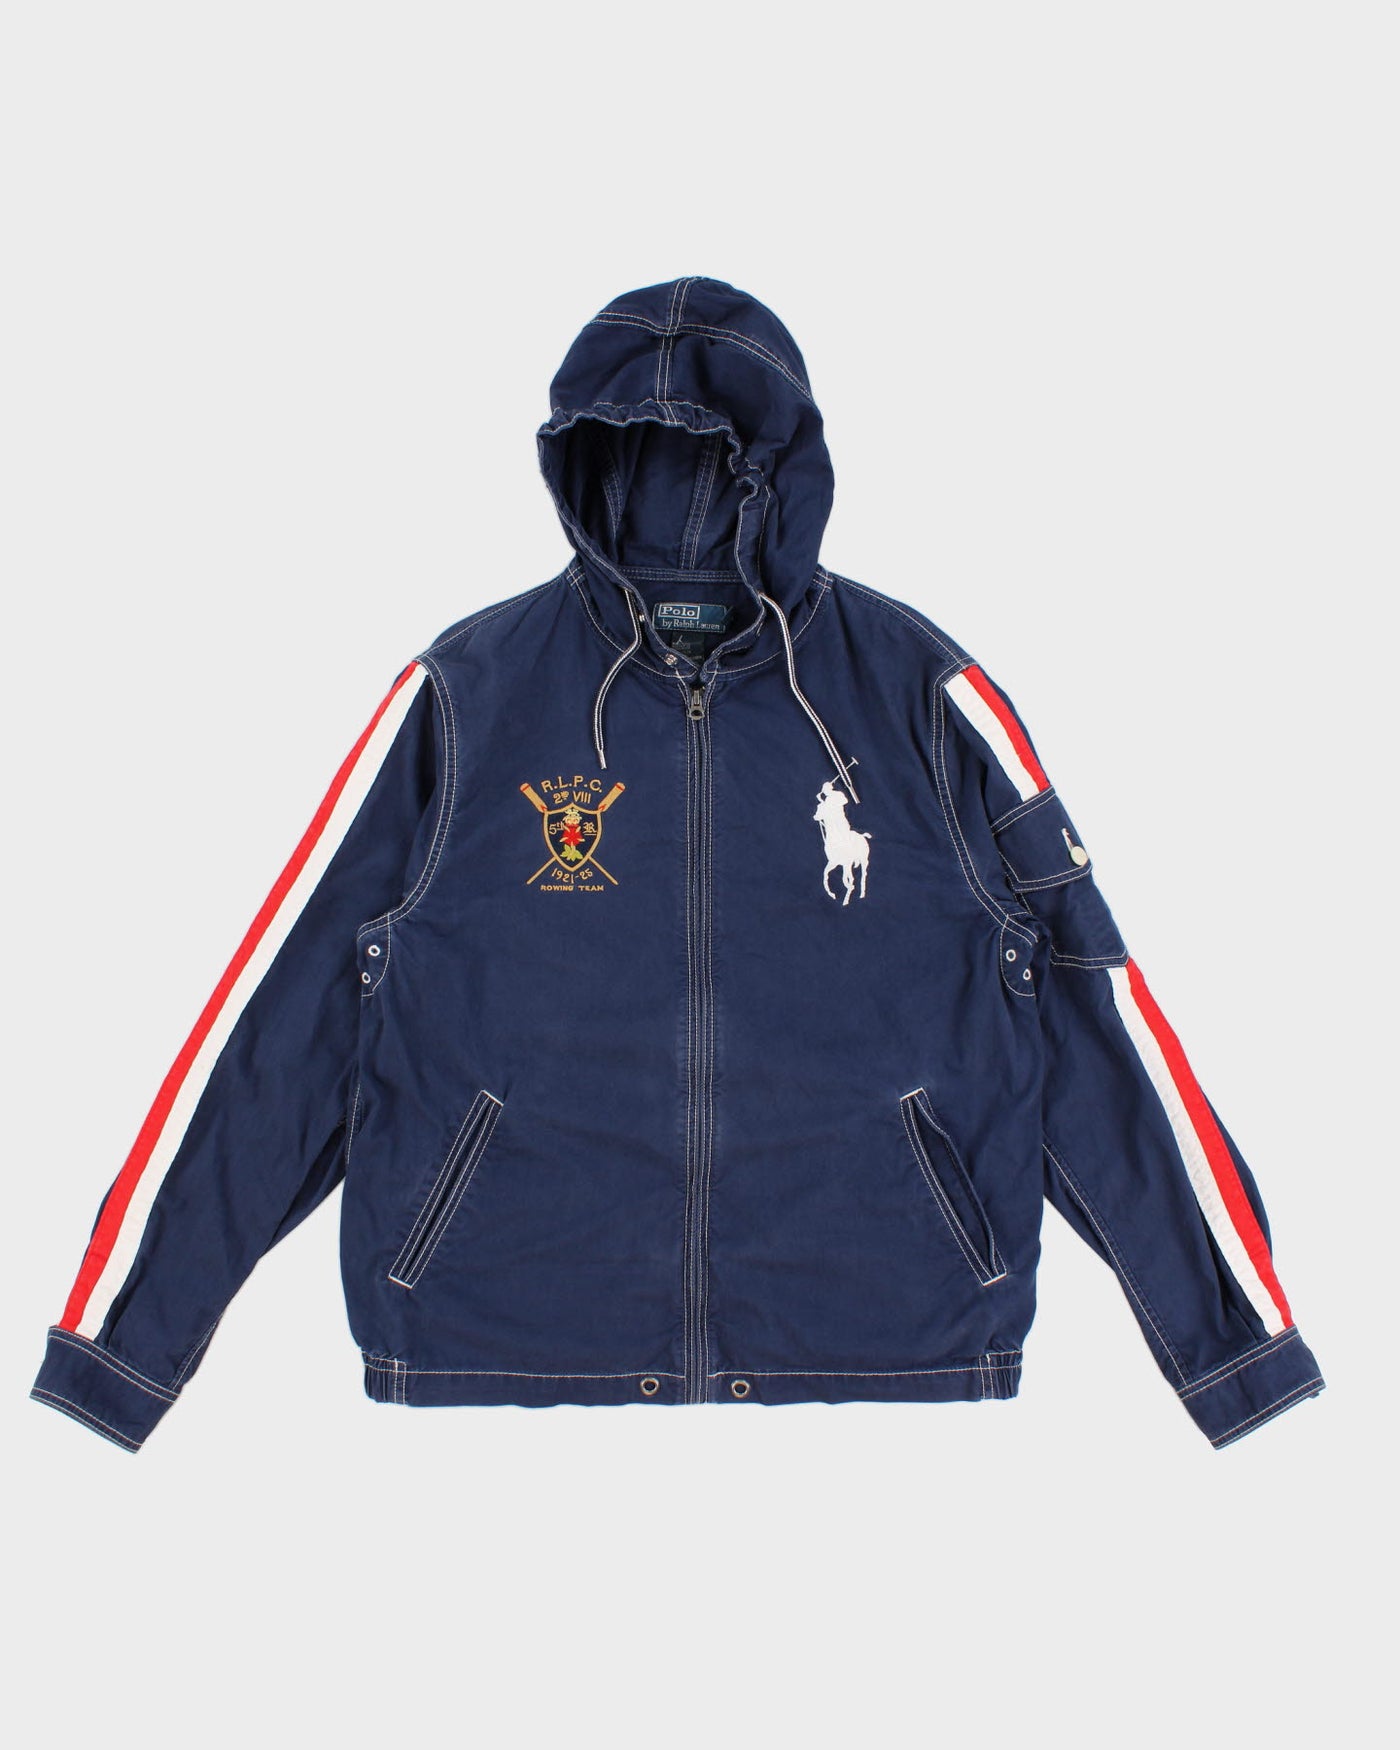 Vintage 90s Polo By Ralph Lauren Hooded Jacket - M